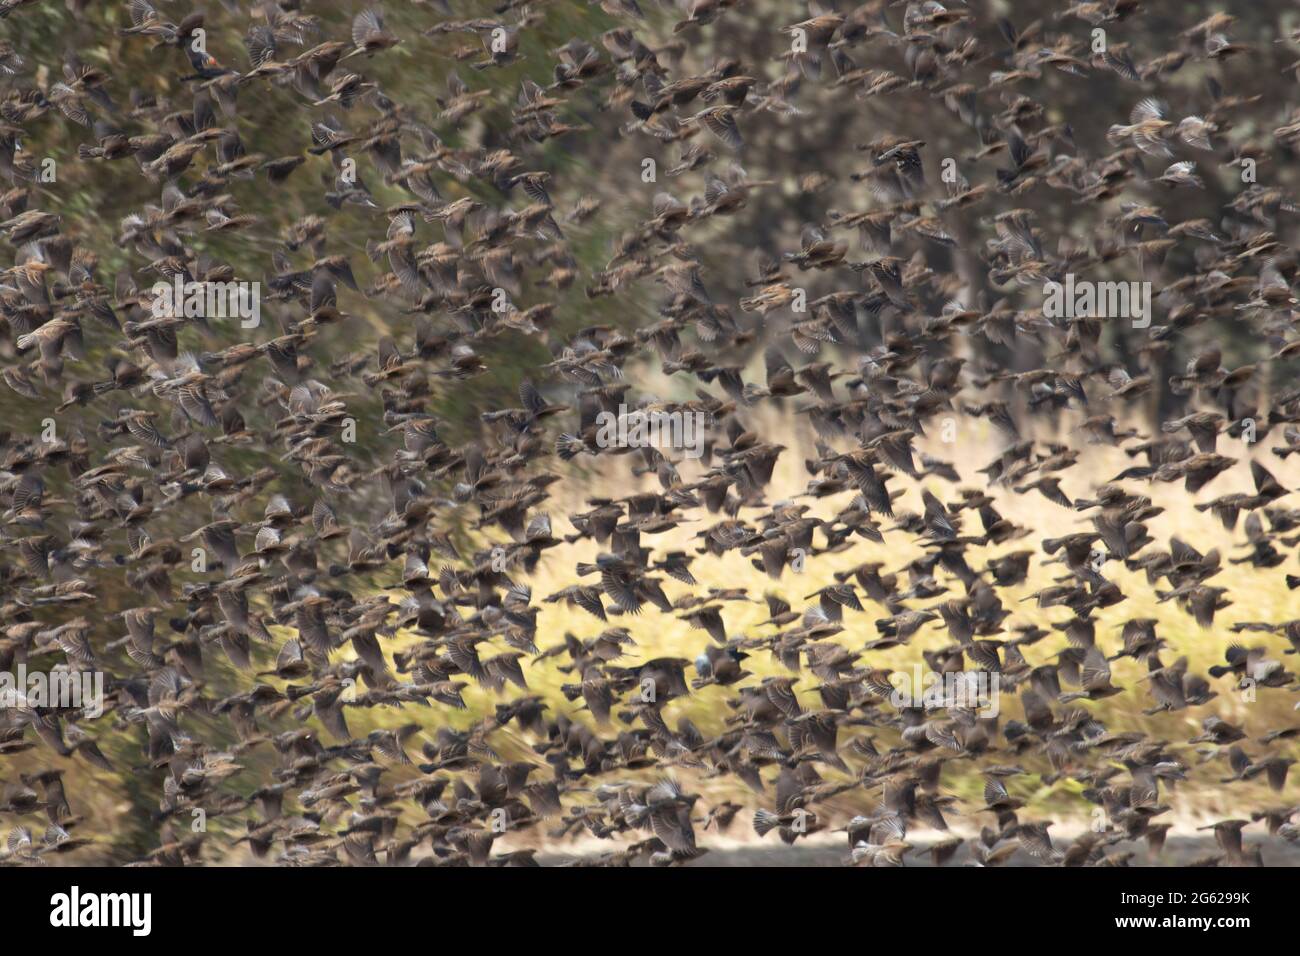 A massive flock of female and juvenile Red-winged Blackbirds, Agelaius phoeniceus, erupt from a riparian corridor in California's San Joaquin Valley. Stock Photo